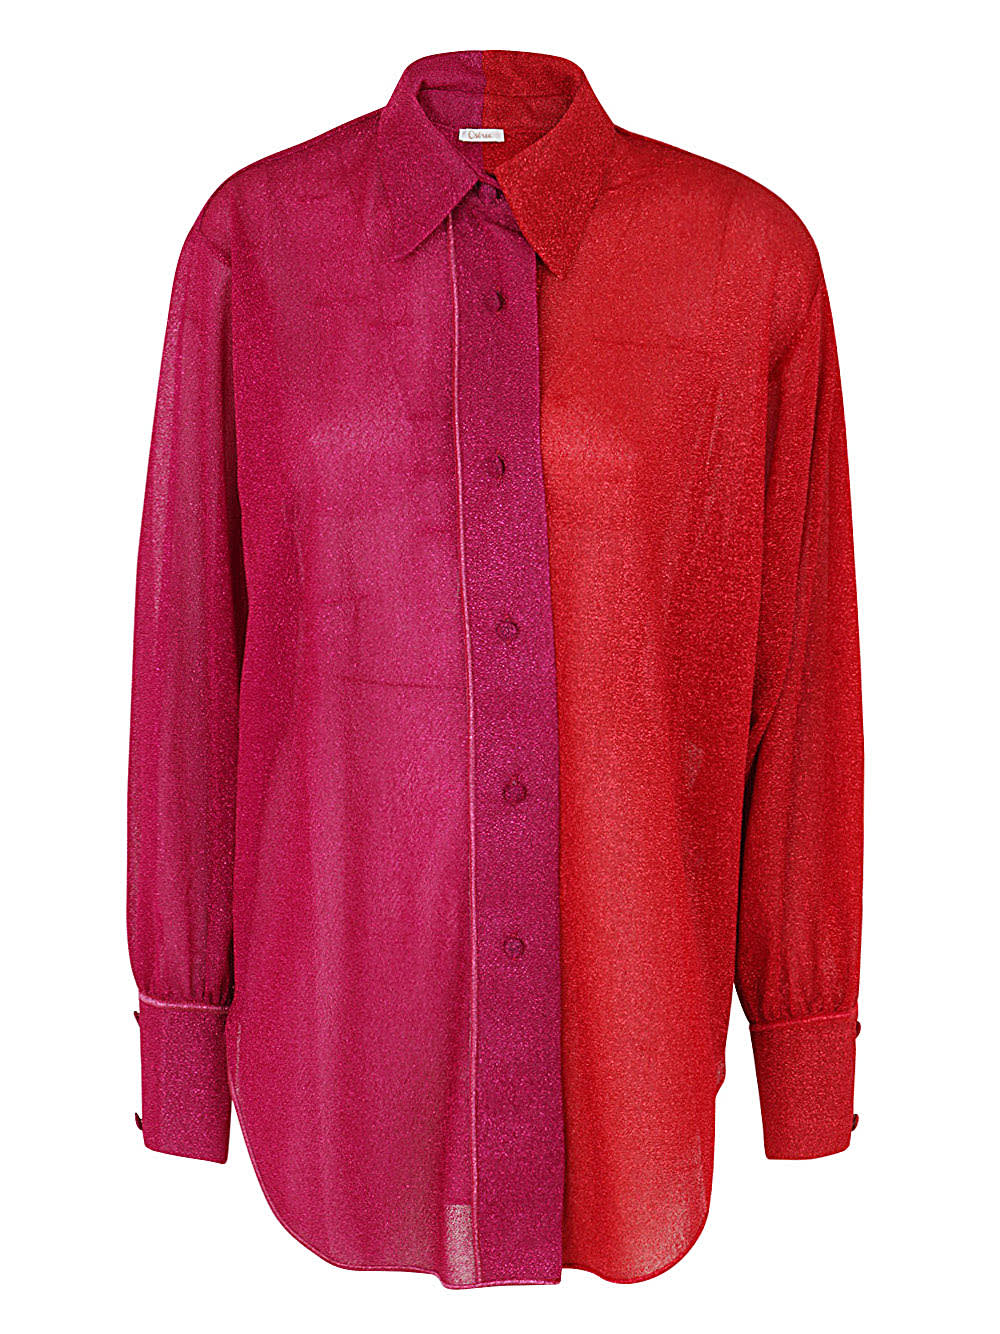 Oseree Lumiere Bicolor Long Shirt In Red & Fuchsia